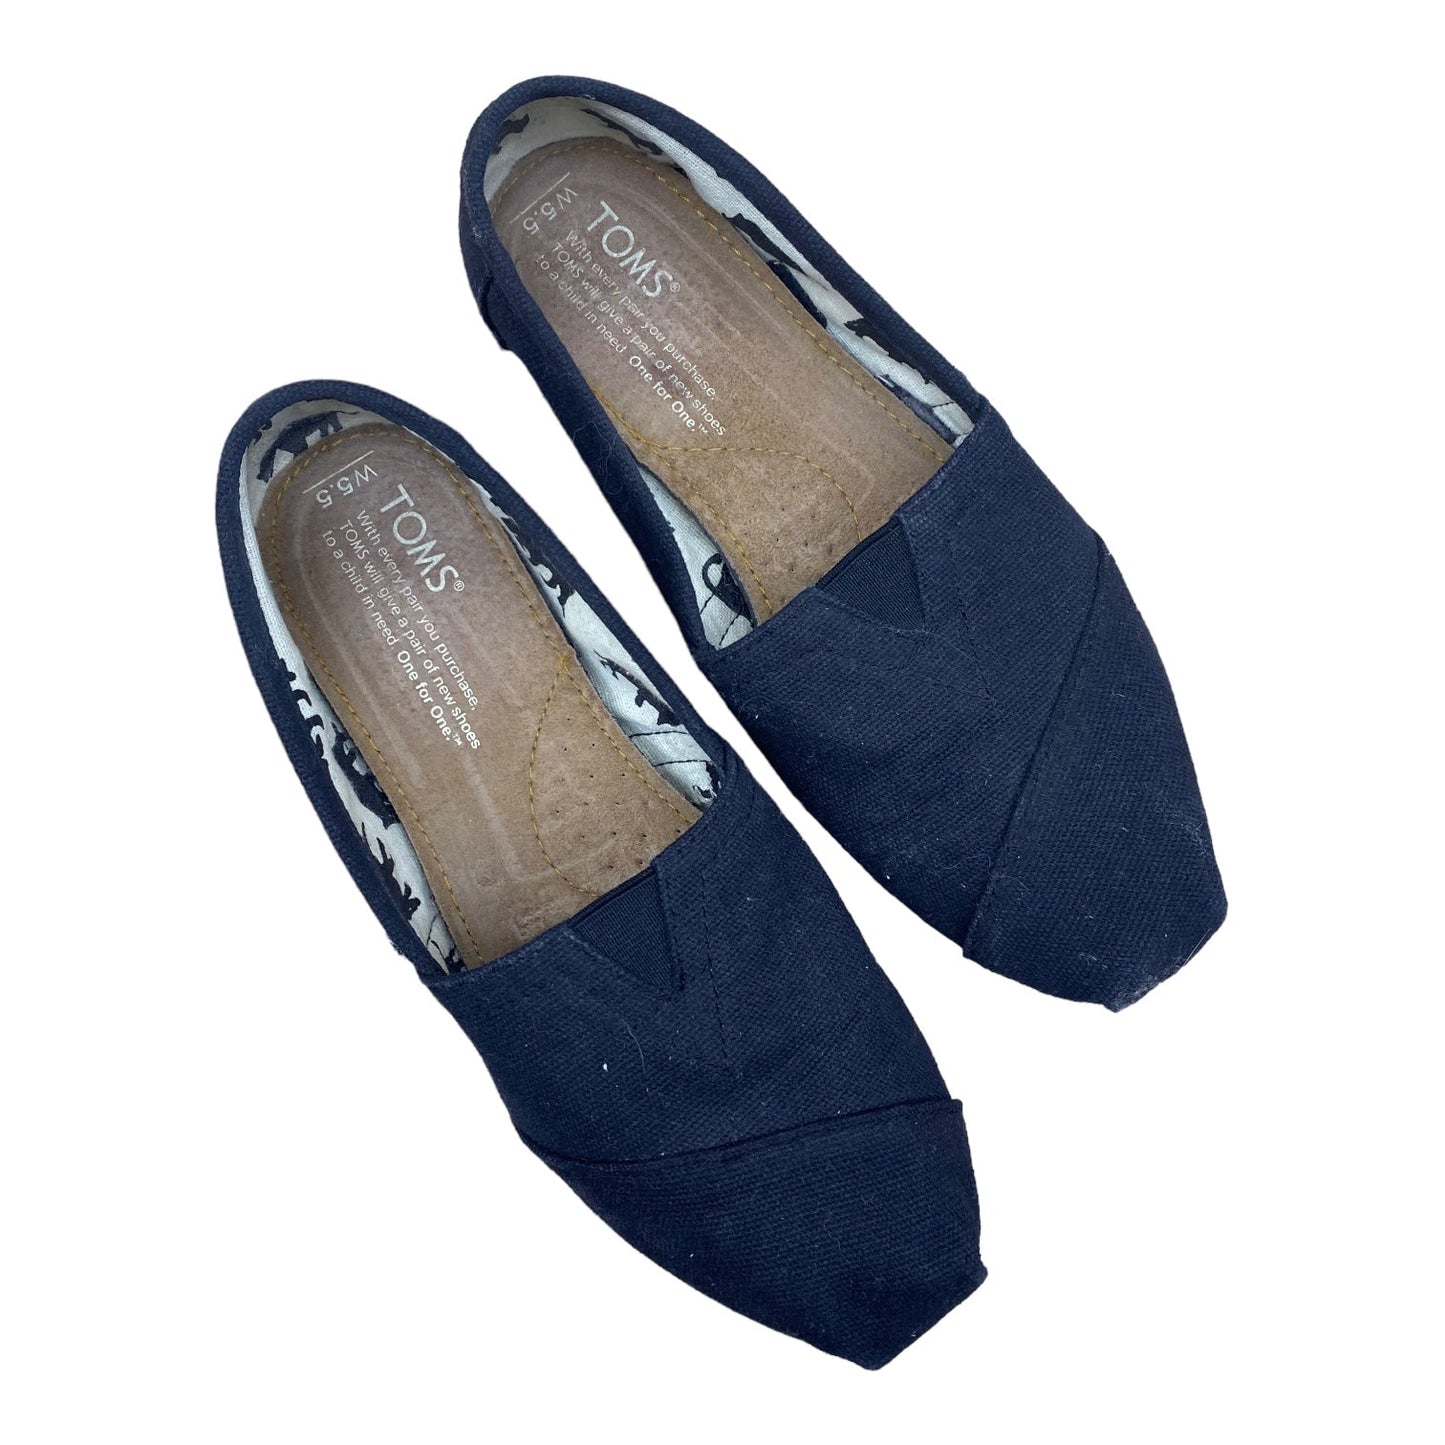 Shoes Flats By Toms  Size: 5.5